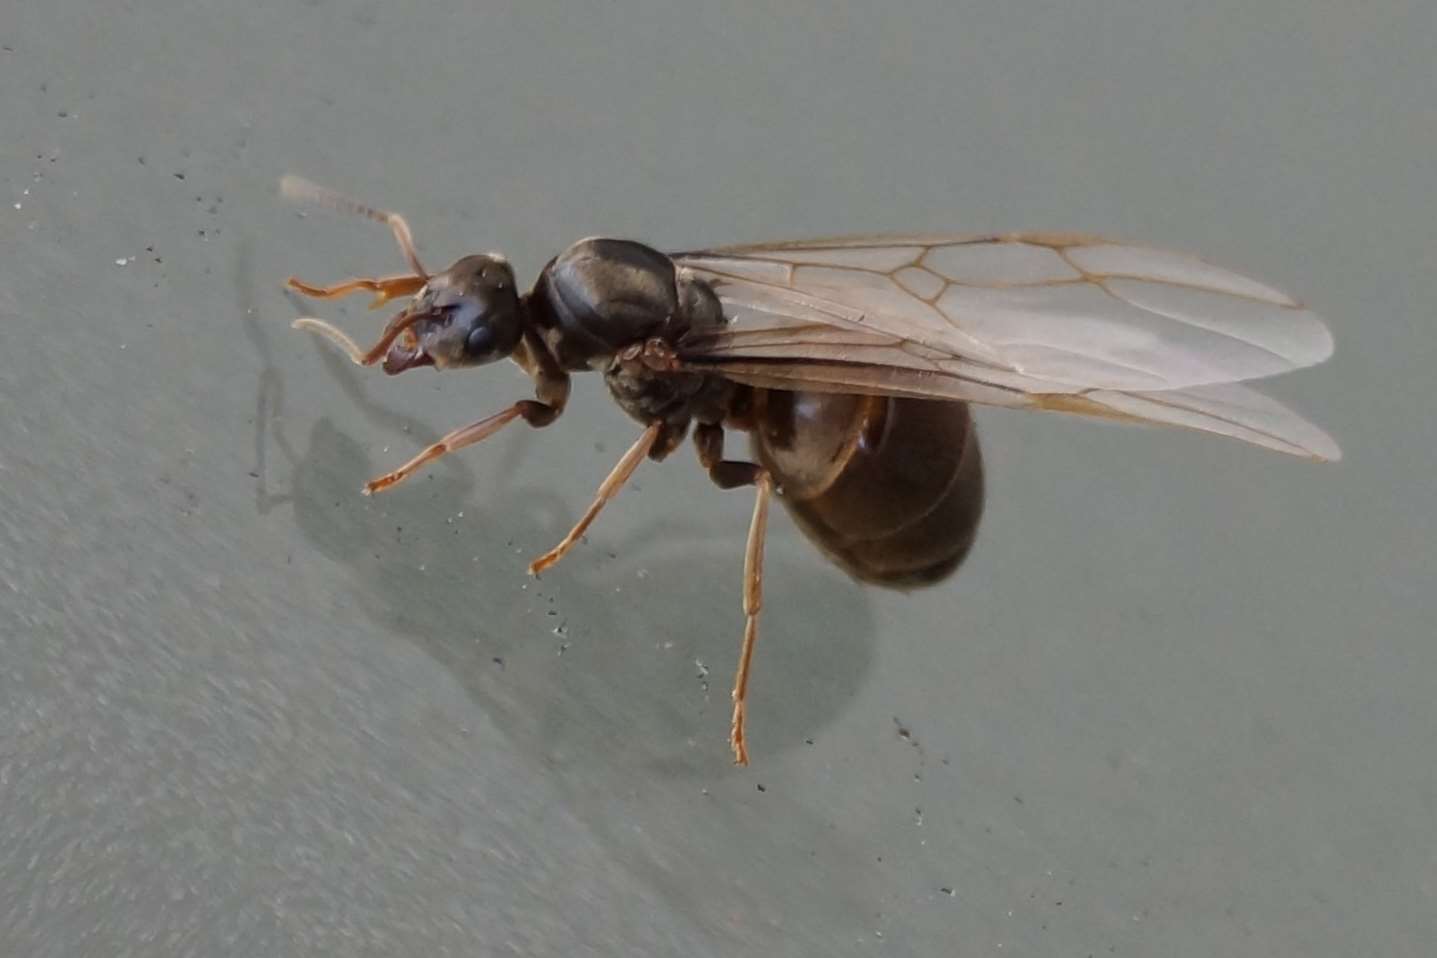 A queen flying ant, which is the subject of a great deal of attention during flying ant day